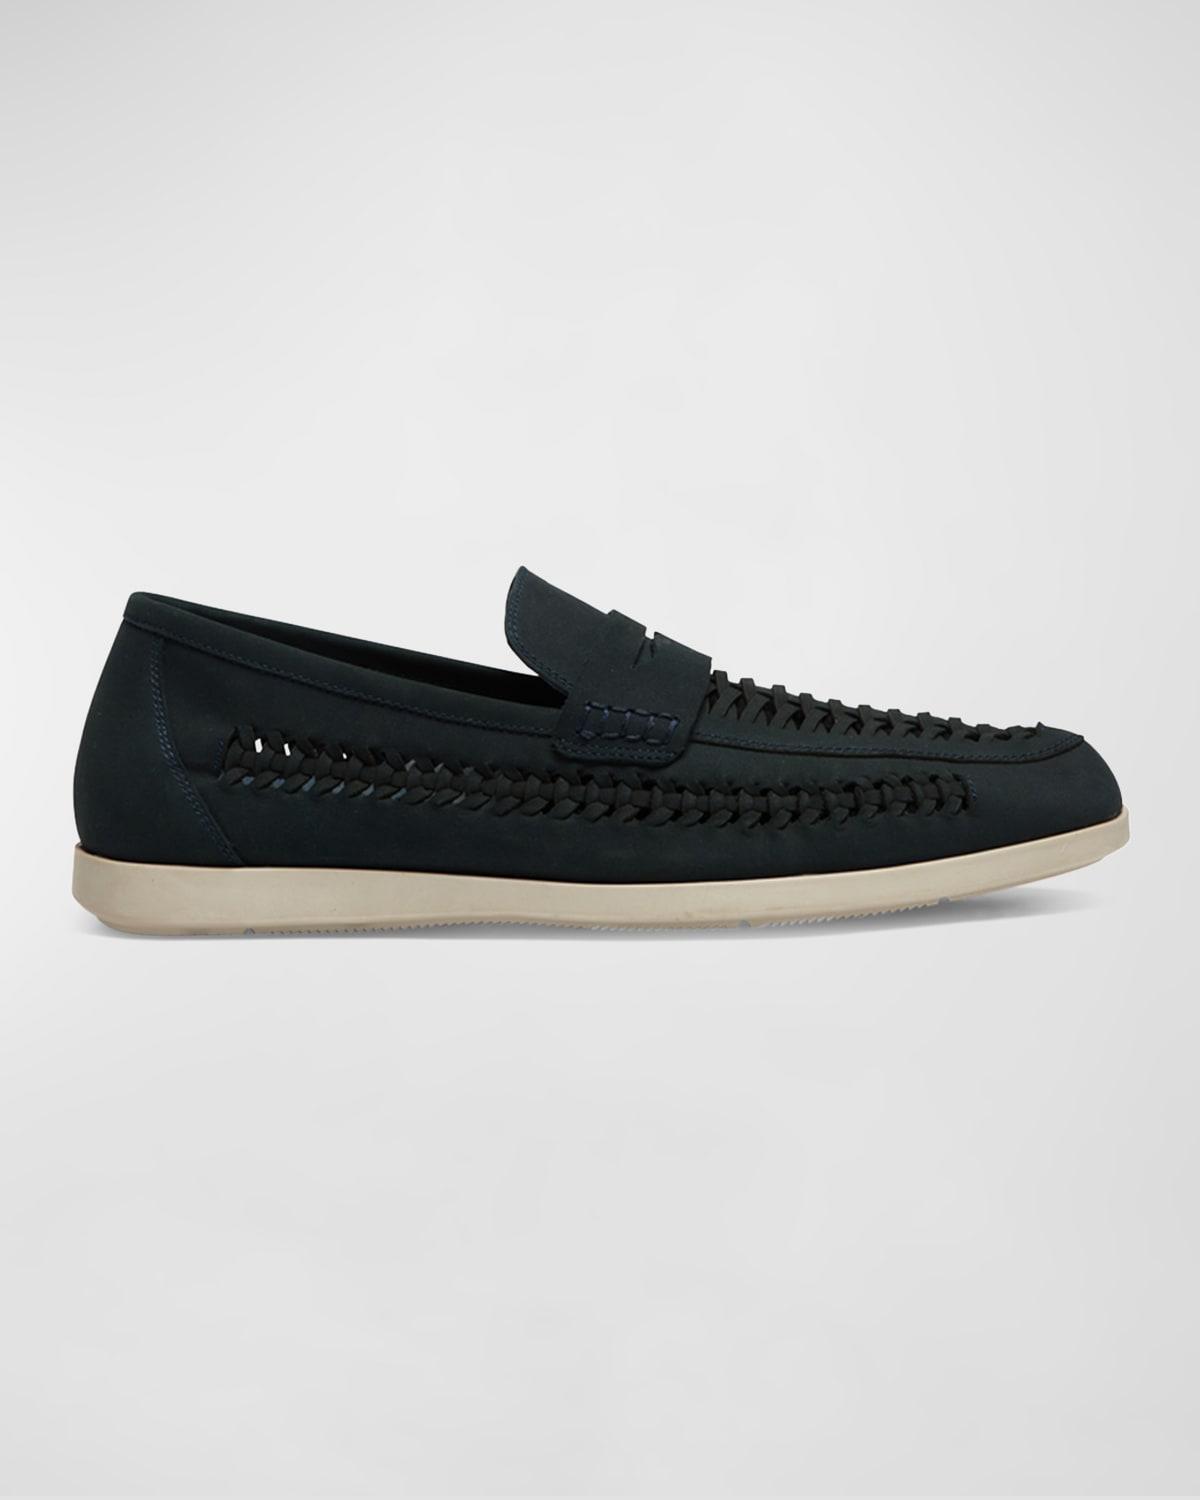 Mens Woven Leather Slippers, Black Product Image